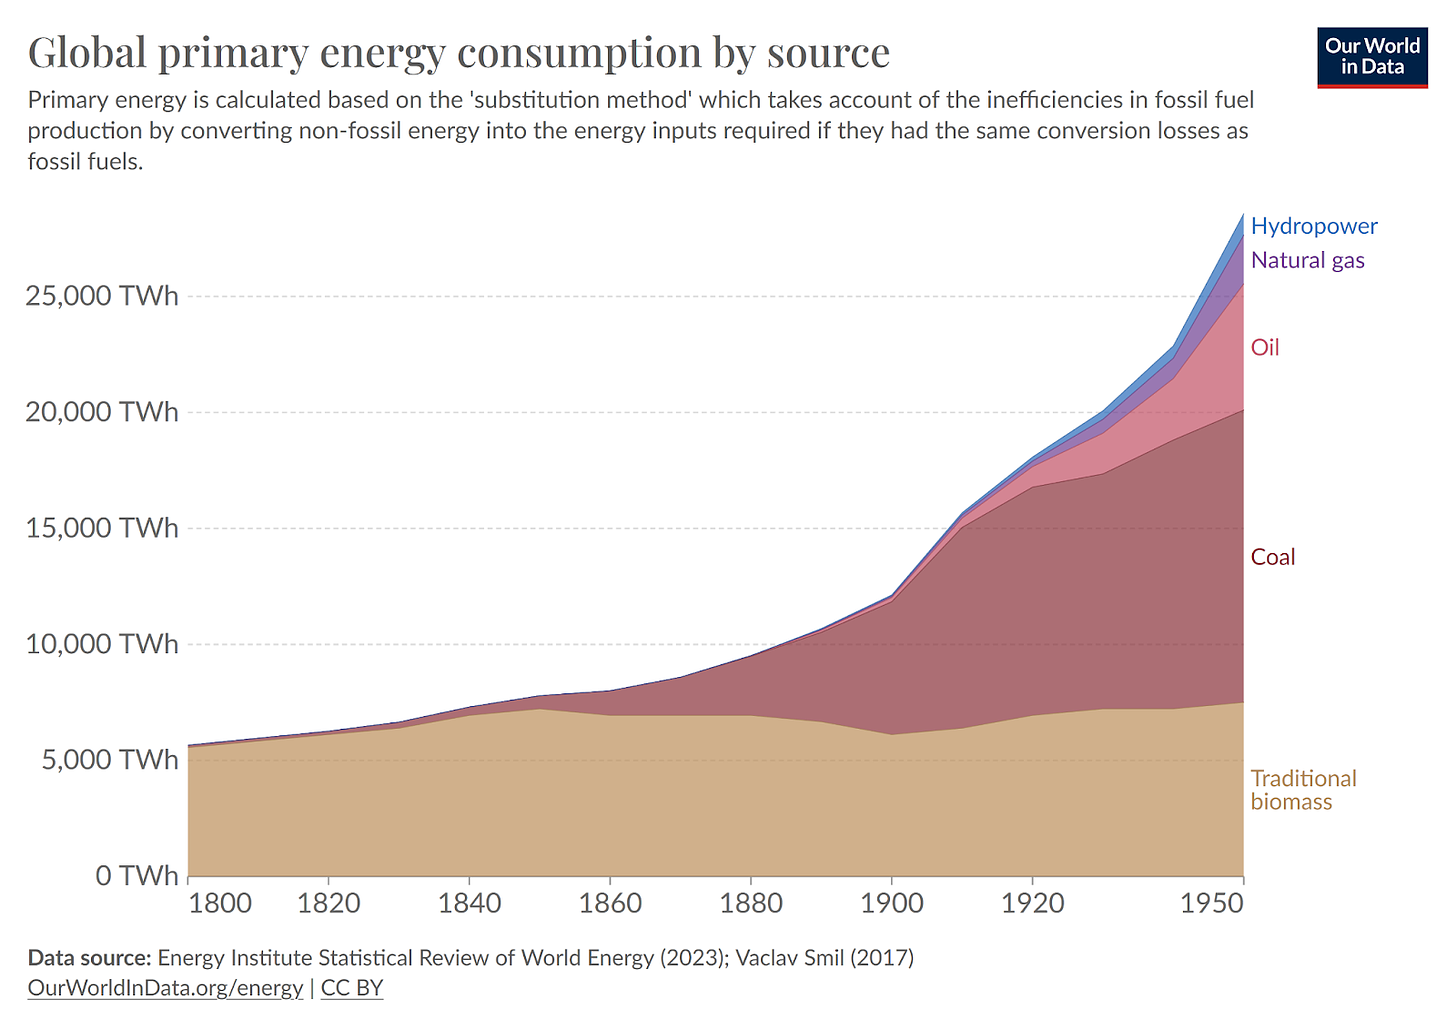 During the 19th and 20th century, people moved from totally using traditional biomass to coal and other fossil fuels.